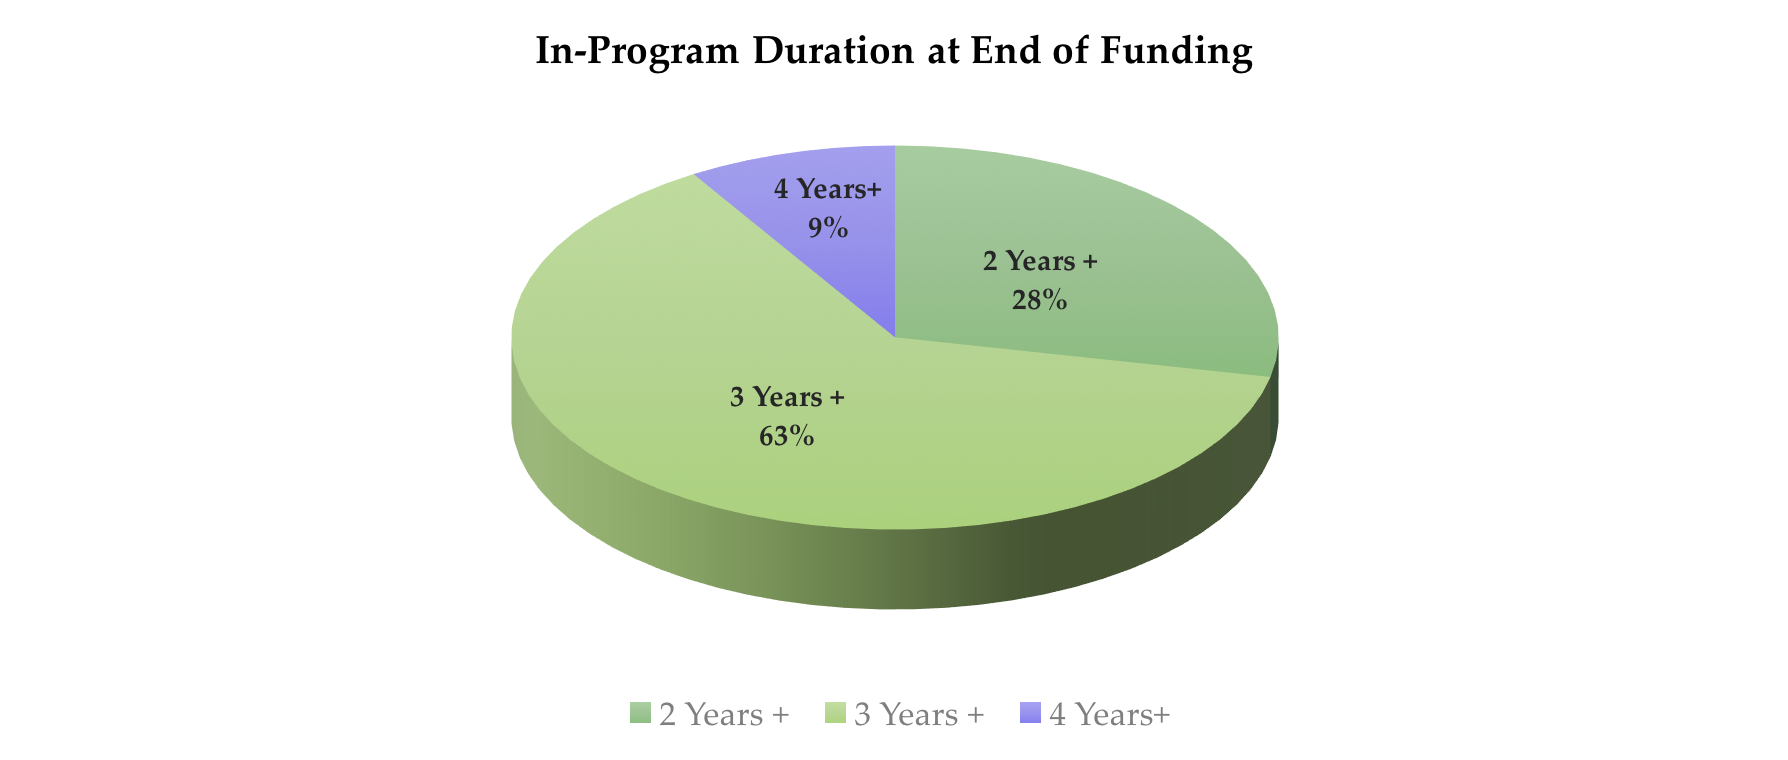 Pie Chart of In-Program Duration at End of Funding. 28% in 2 Years+, 63% in 3 Years+, 9% in 4 Years+.